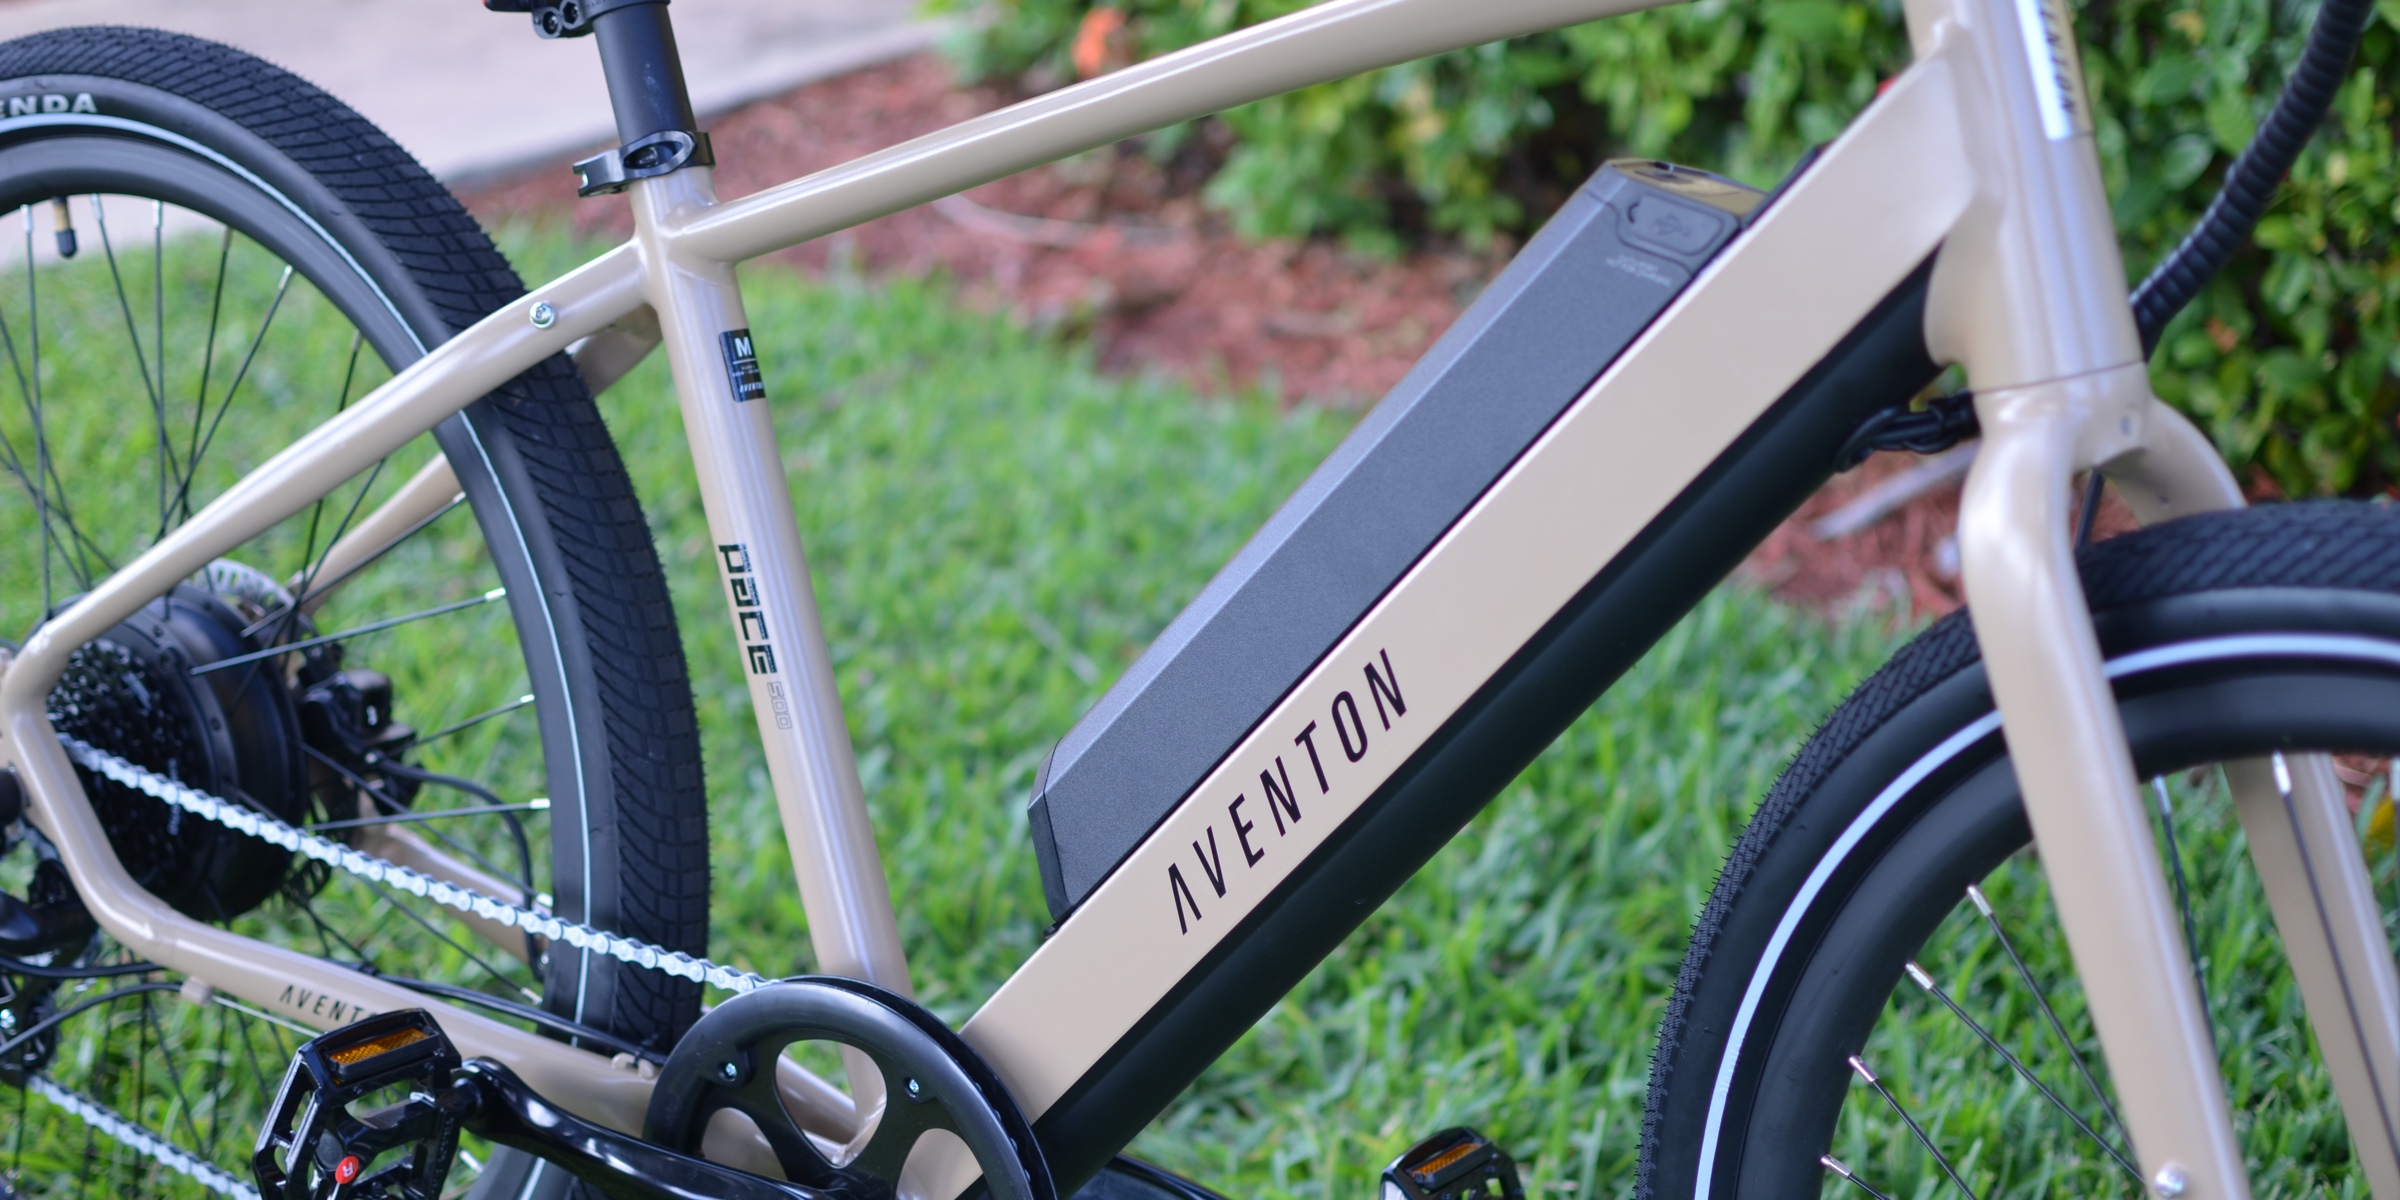 Aventon Pace 500 review: A 28 MPH e-bike for $1,399 that is a commuting dream